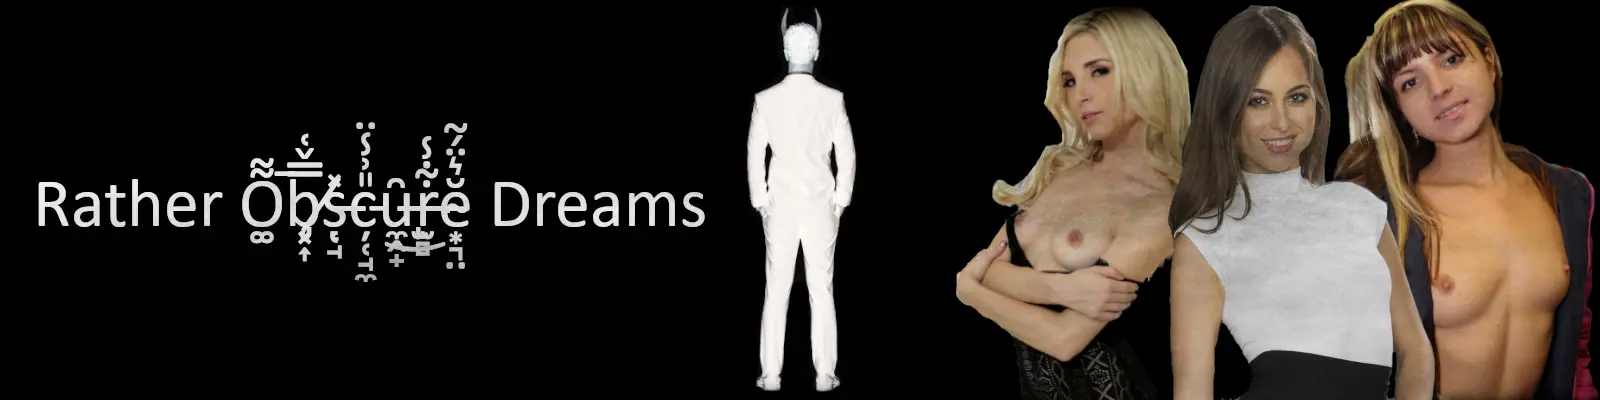 Rather Obscure Dreams main image